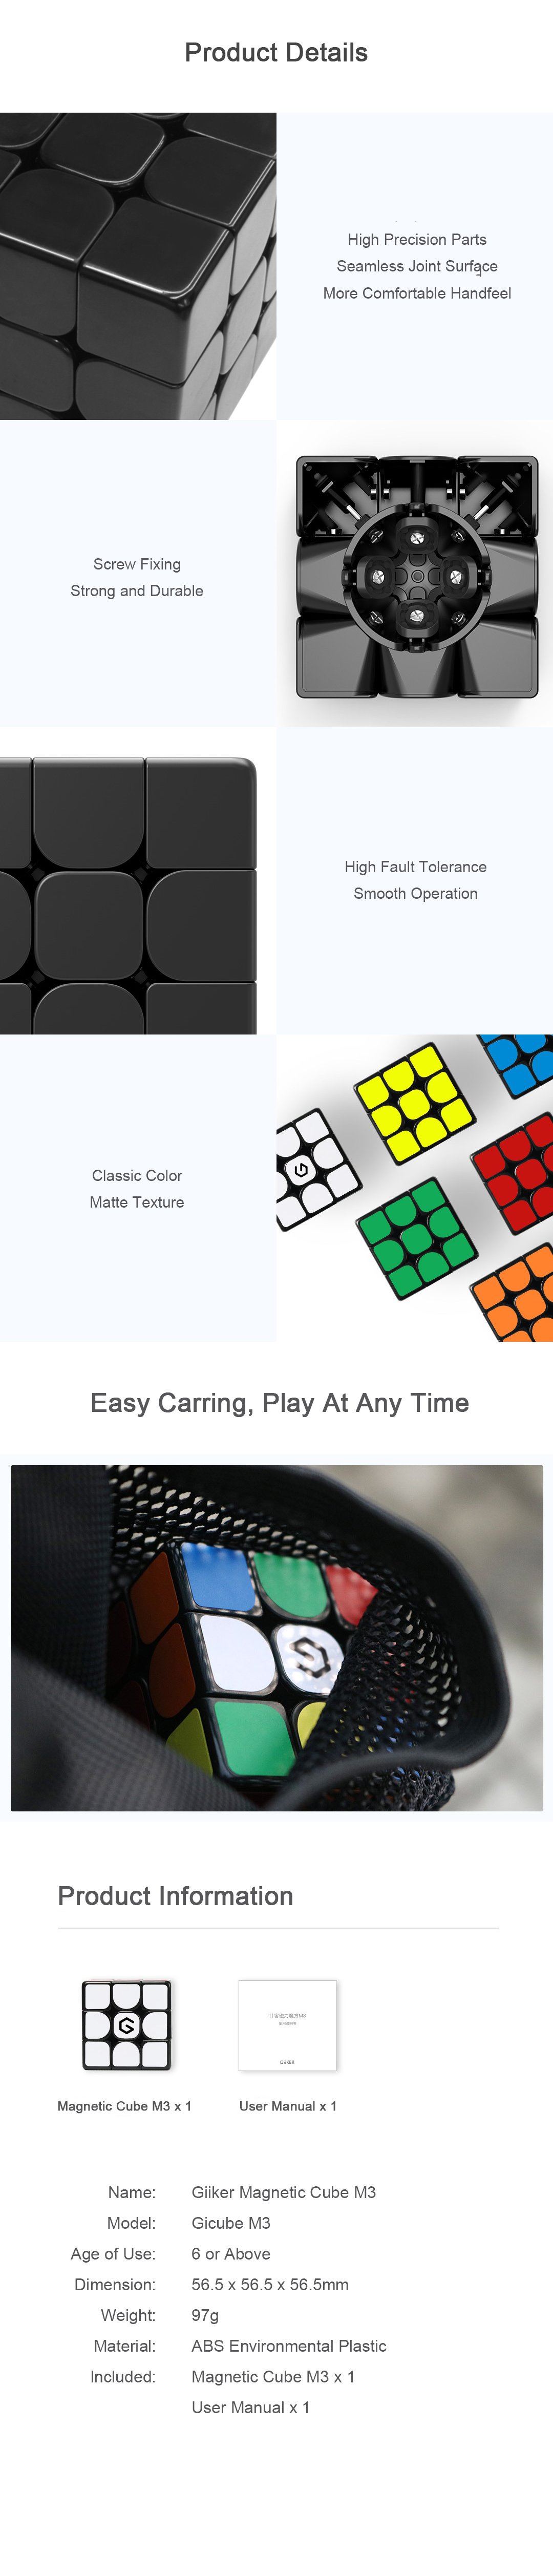 Xiaomi Giiker M3 Magnetic Cube 3x3x3 Vivid Color Square Magic Cube Puzzle Science Education Toy Gift 25